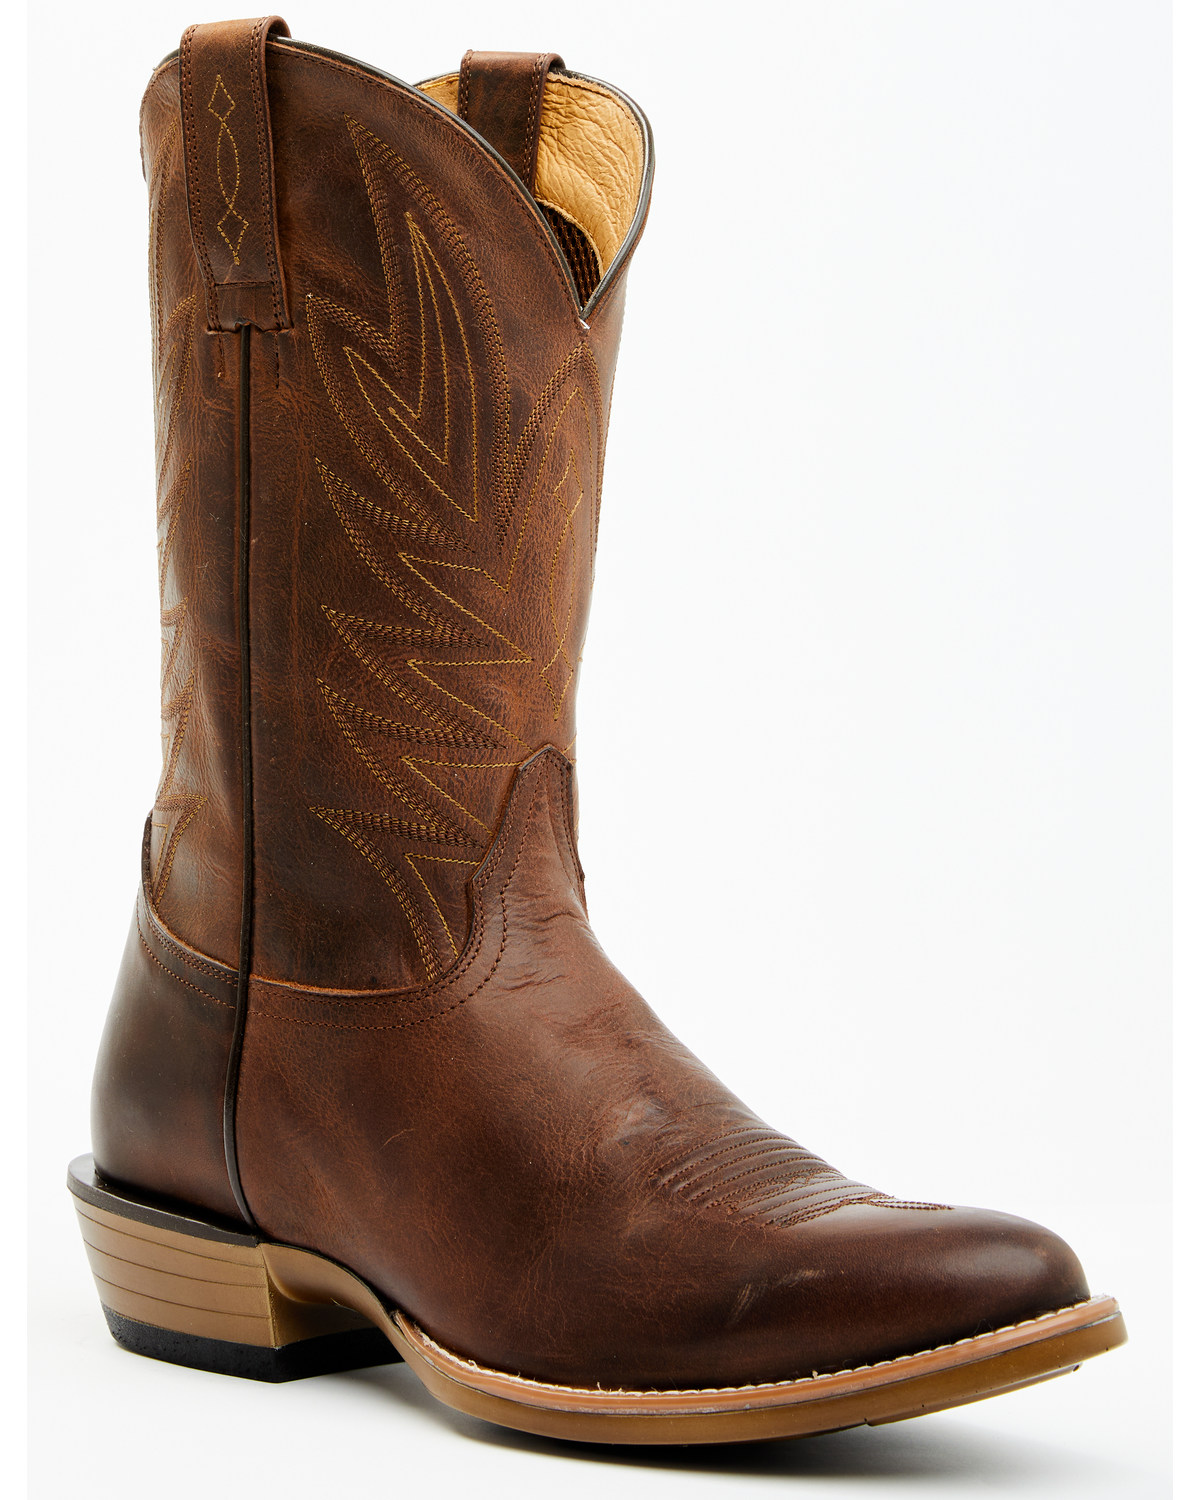 Cody James Men's Hoverfly Western Performance Boots